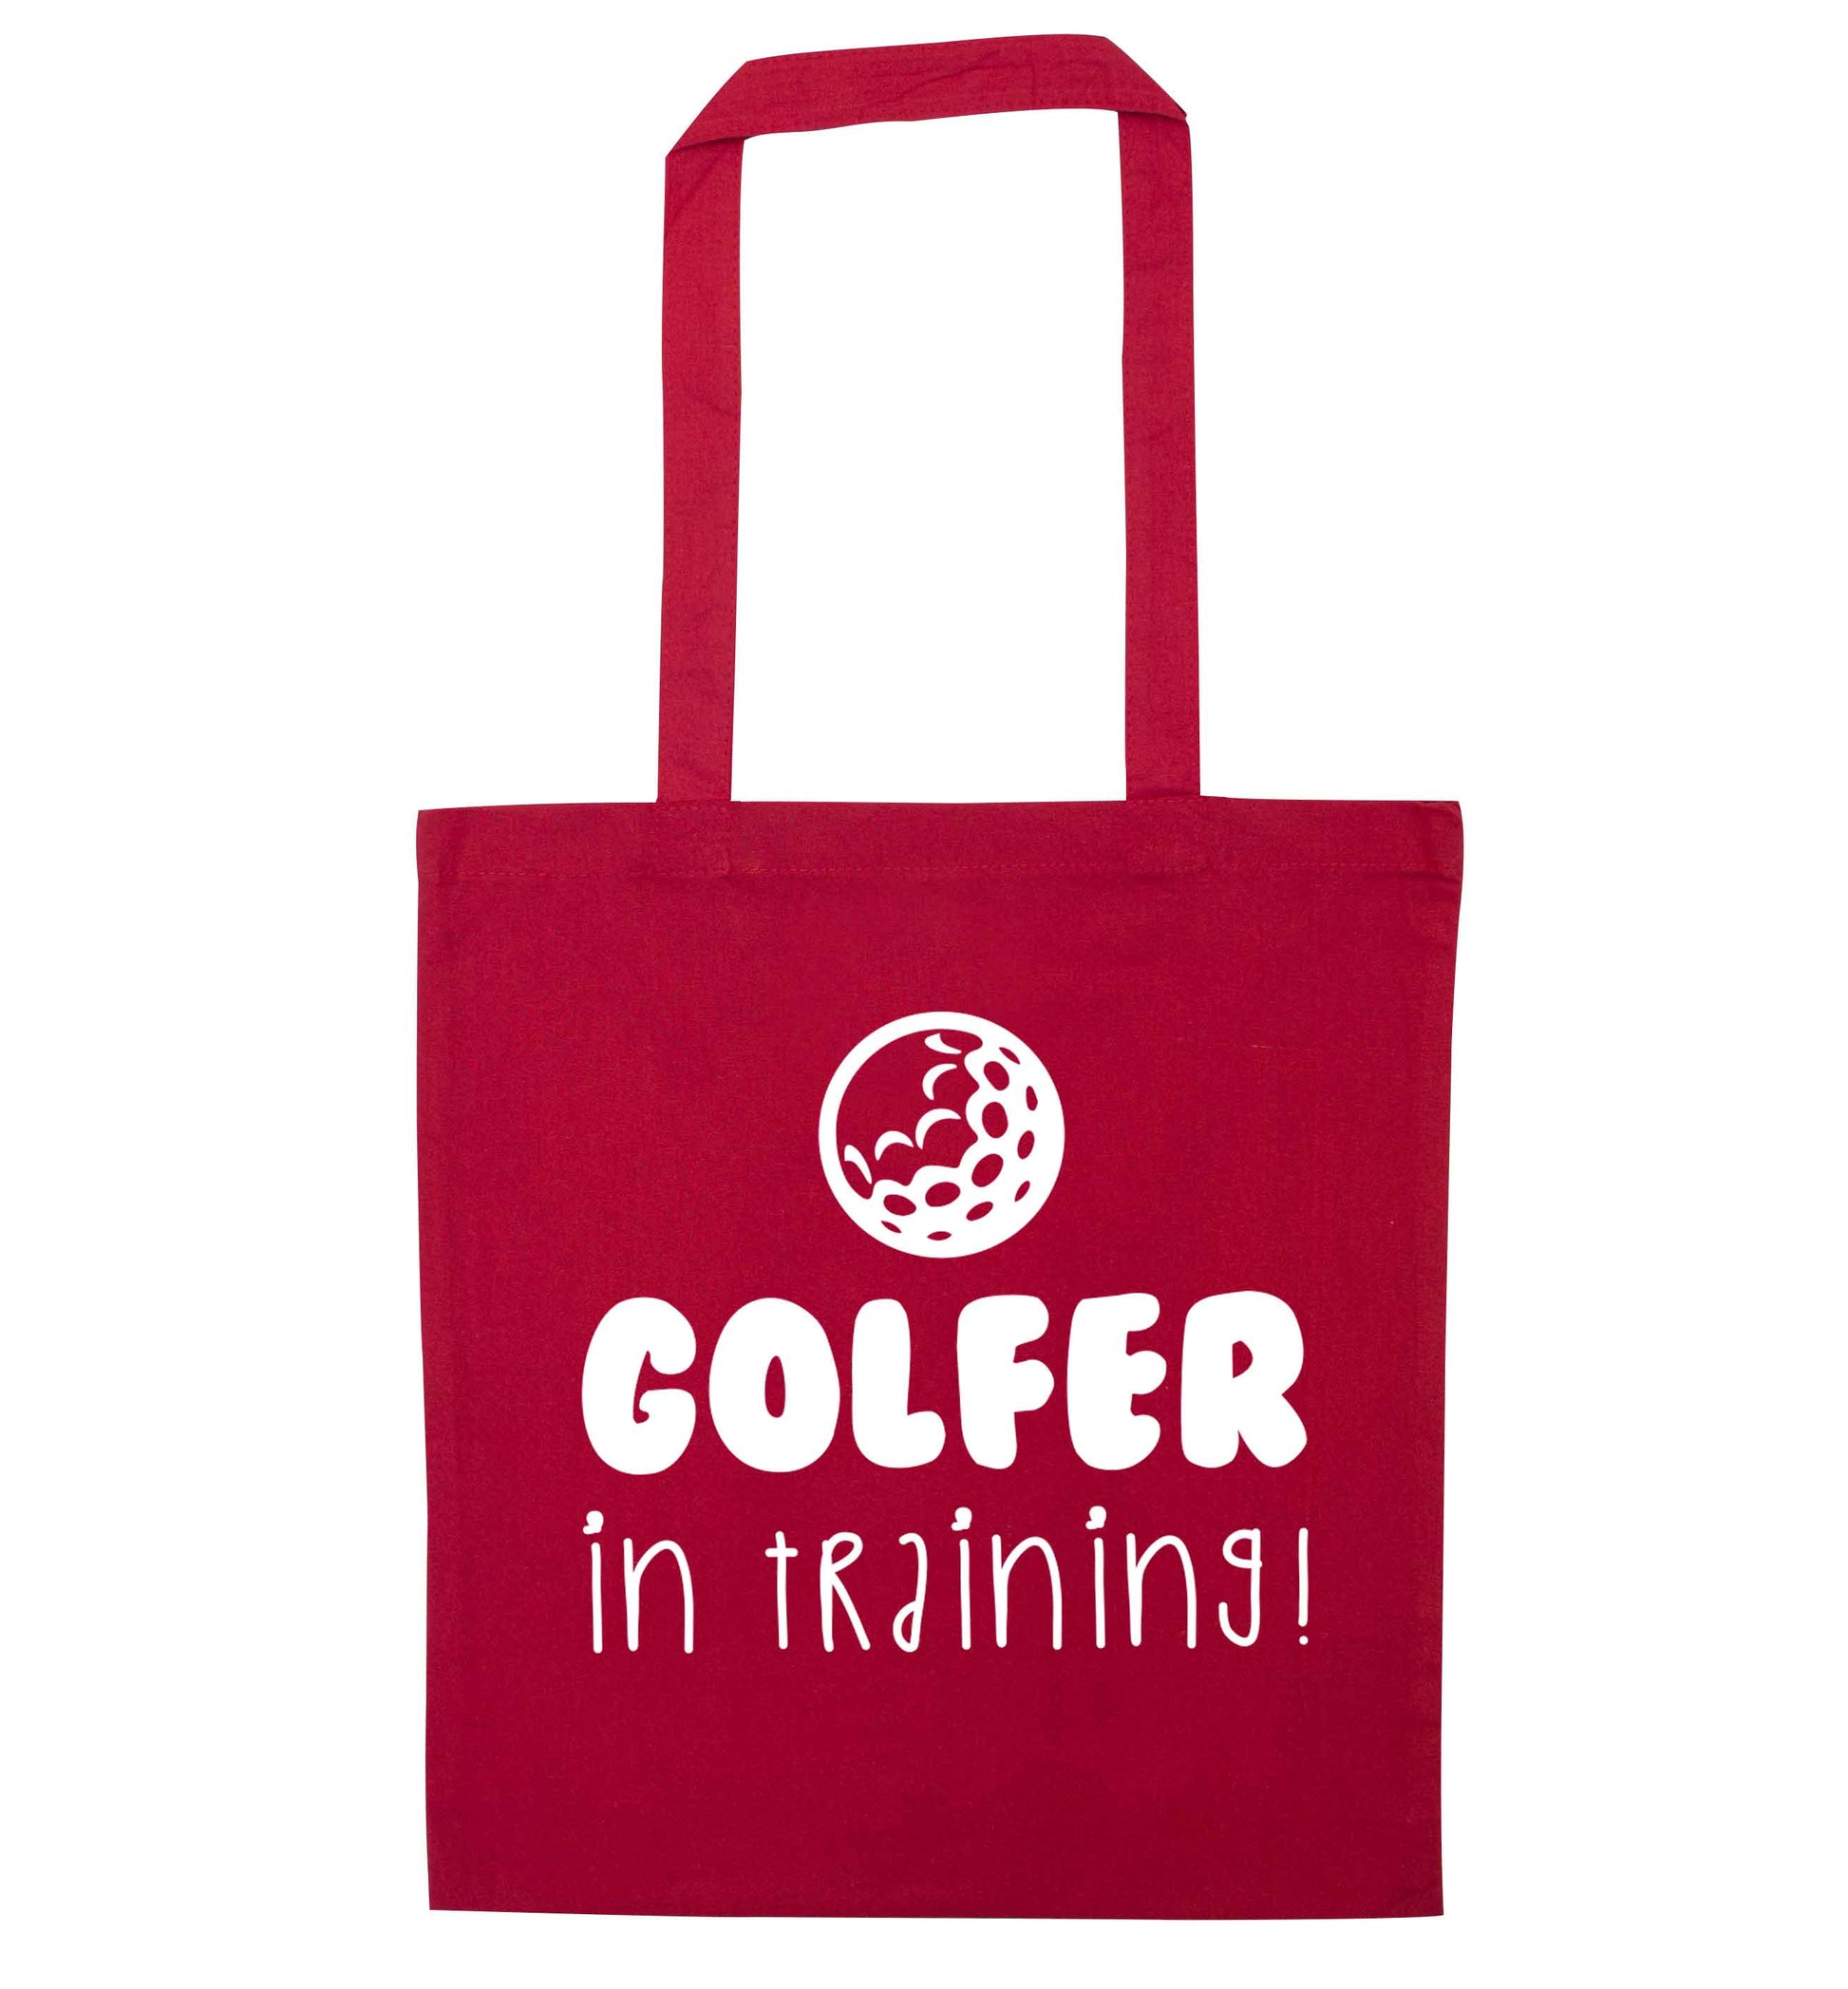 Golfer in training red tote bag